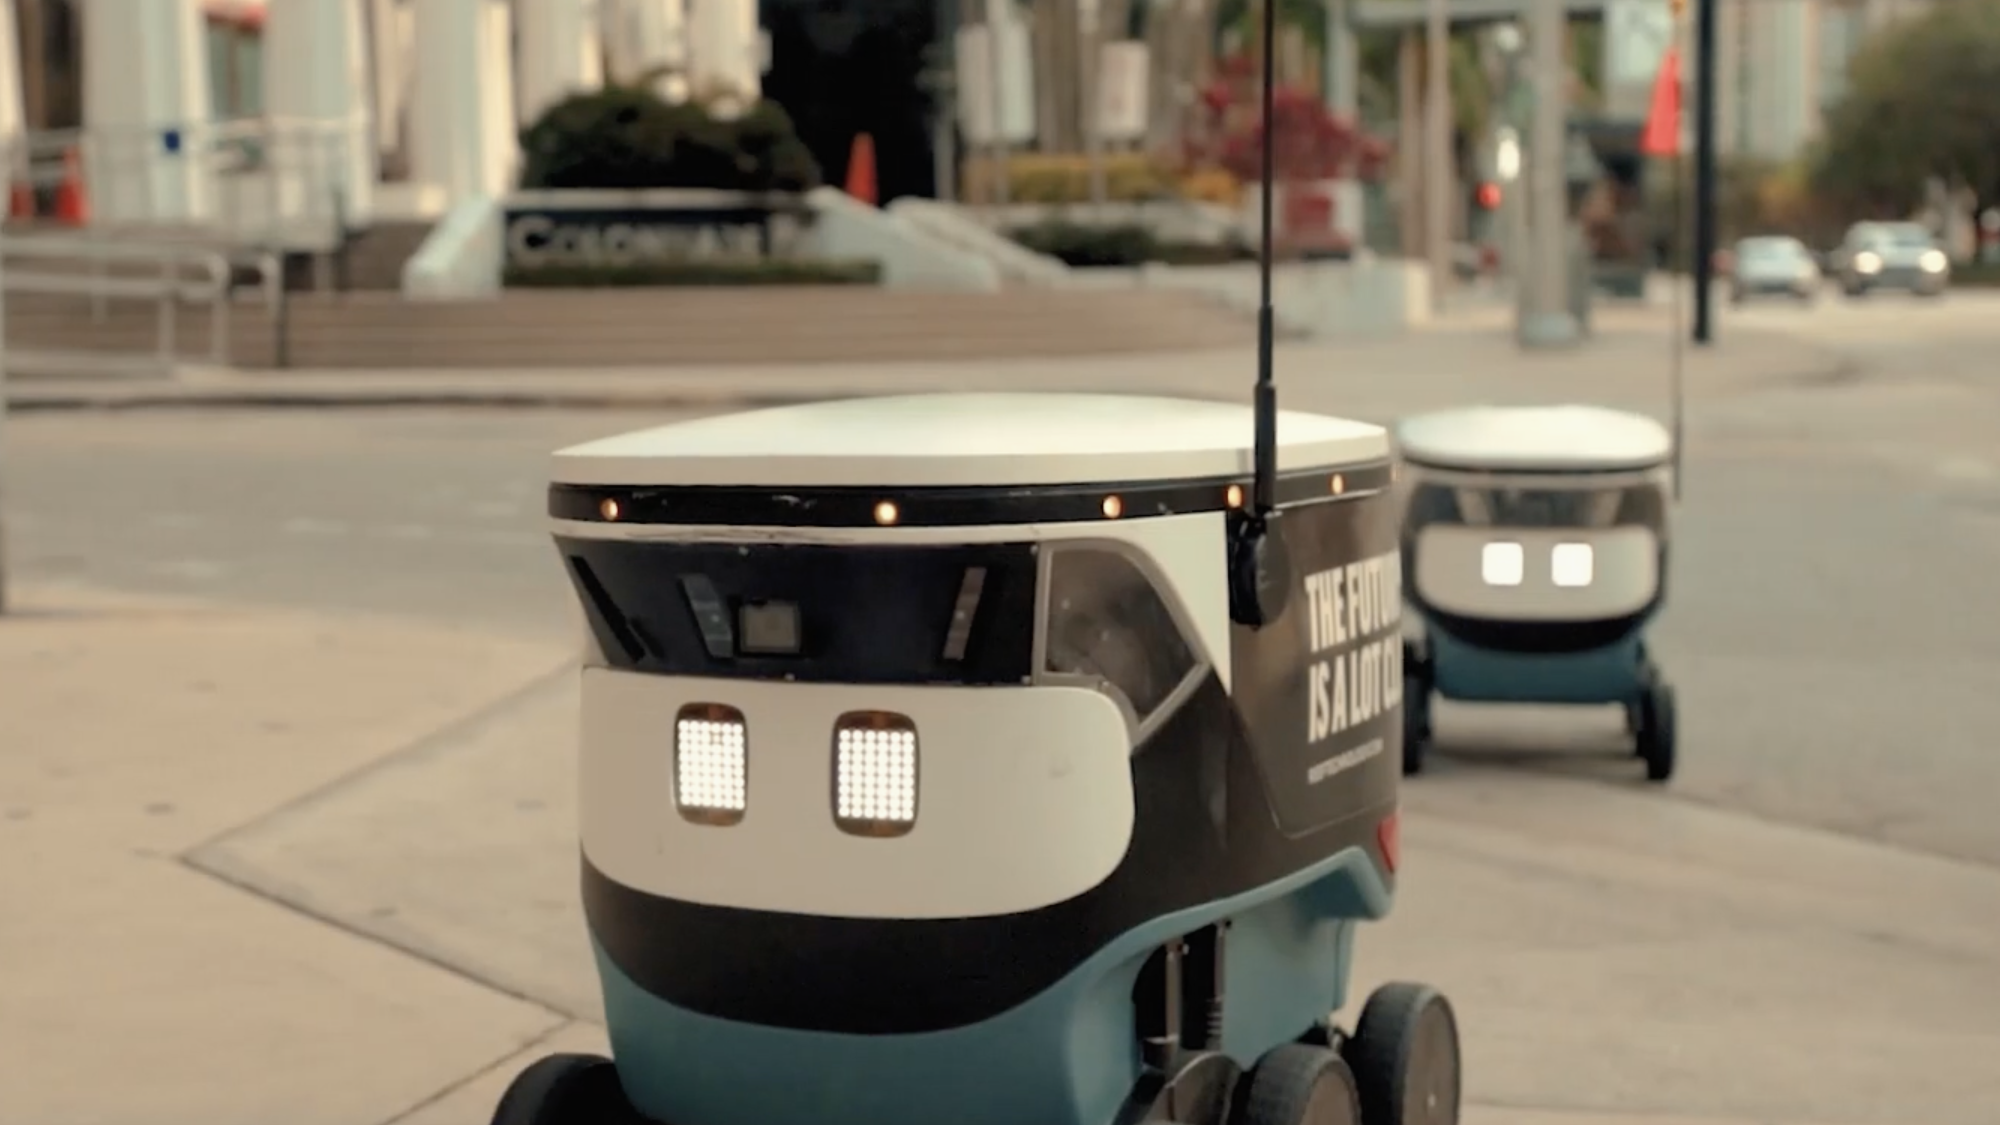 Two Cartken robotic delivery vehicles traveling along a sidewalk in a line